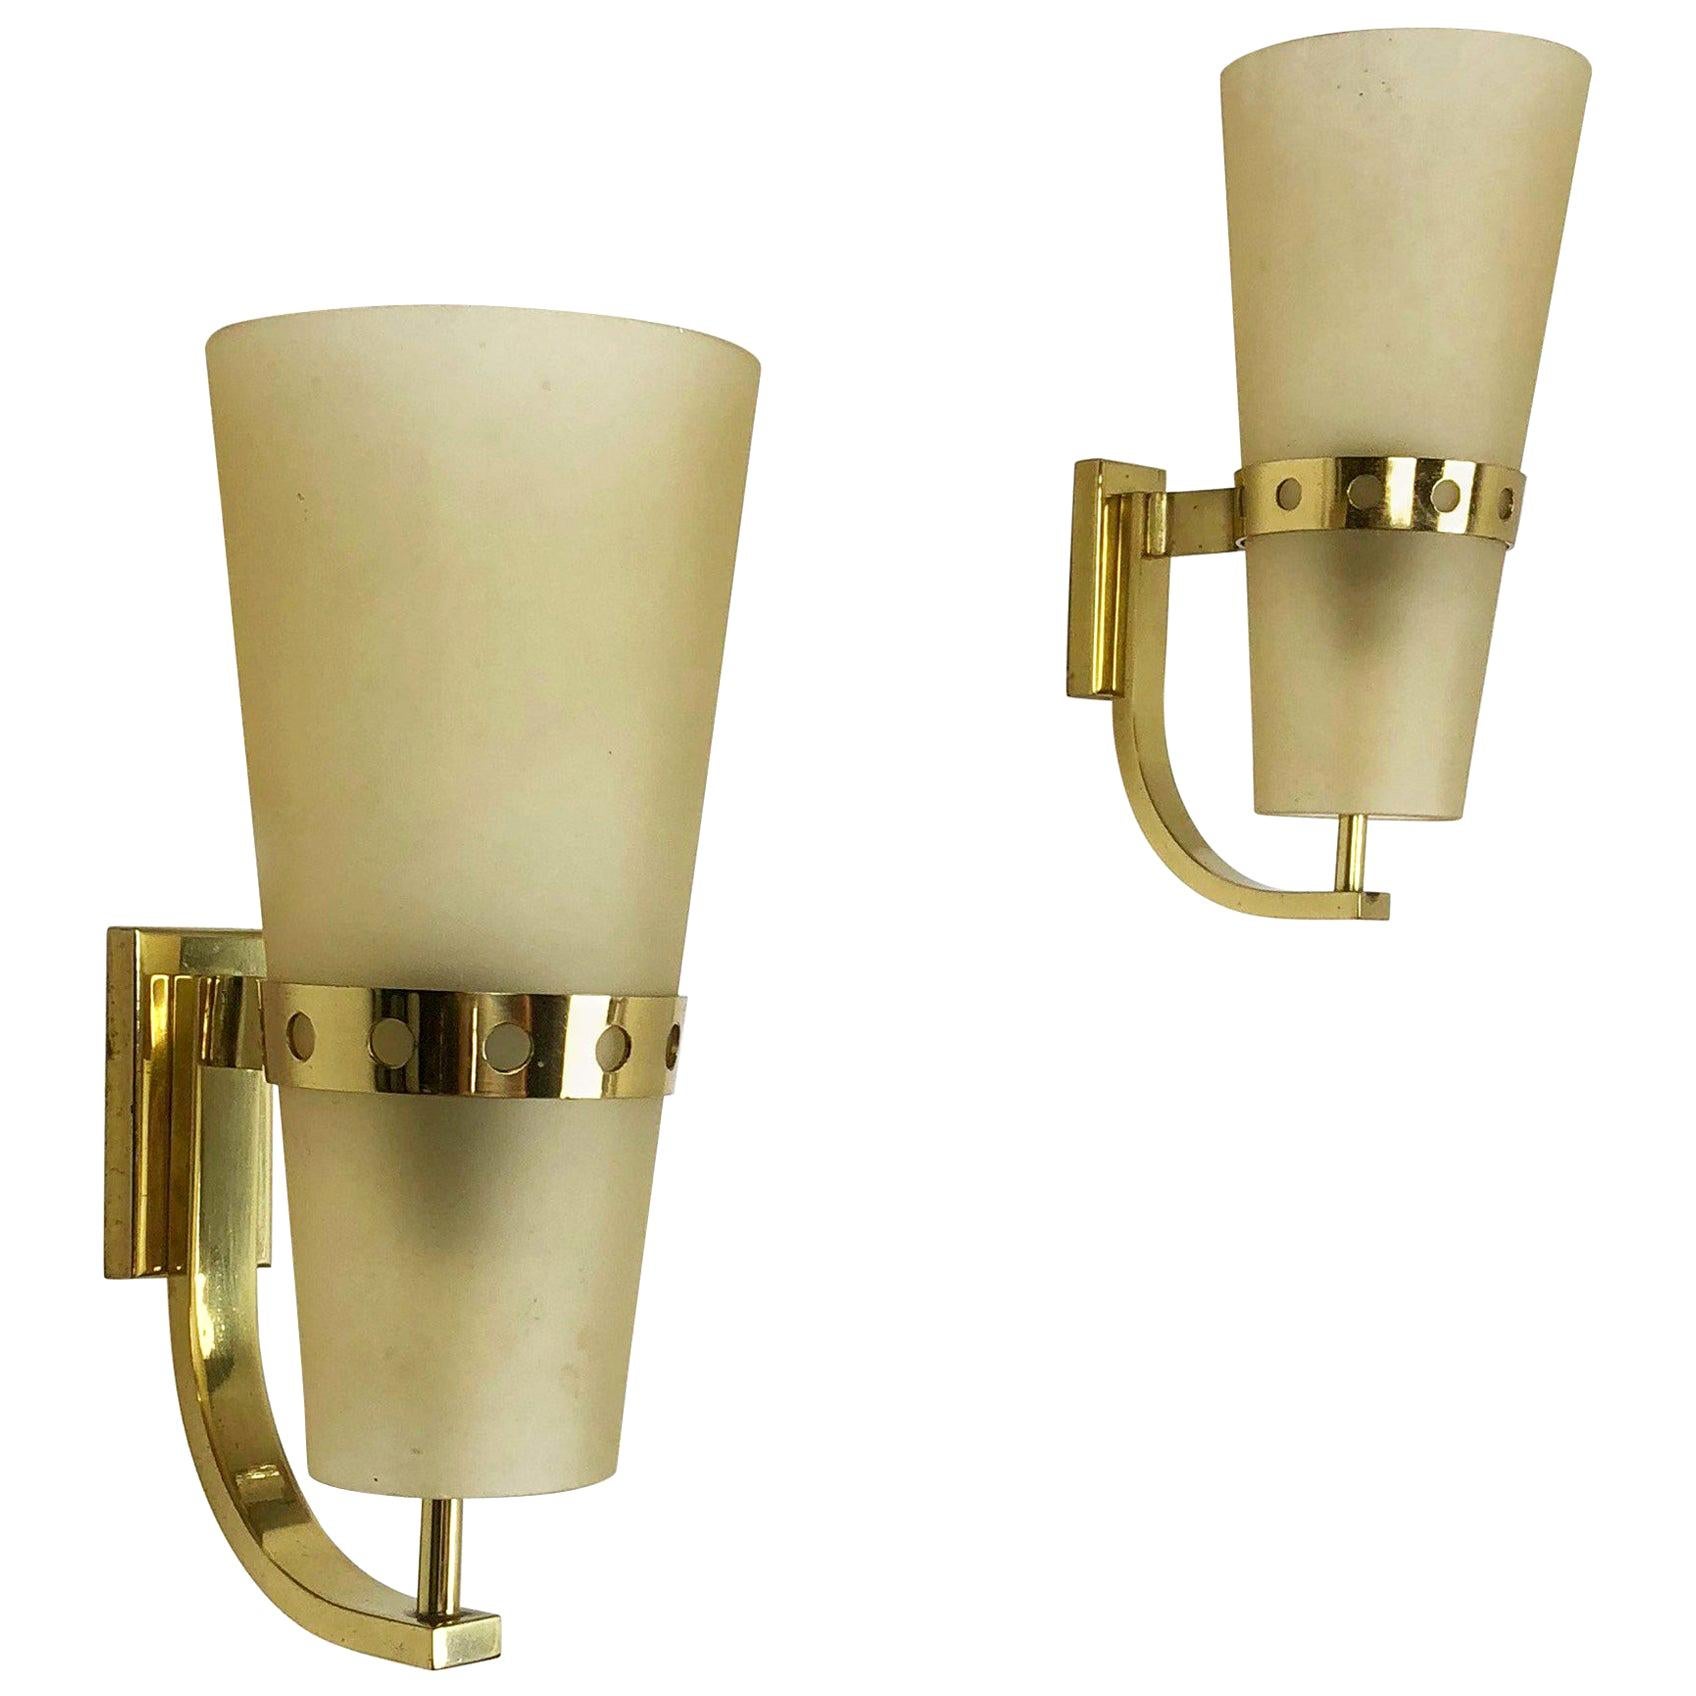 Set of Two Modernist Brass Italian Wall Lights Sconces, Italy, 1950s